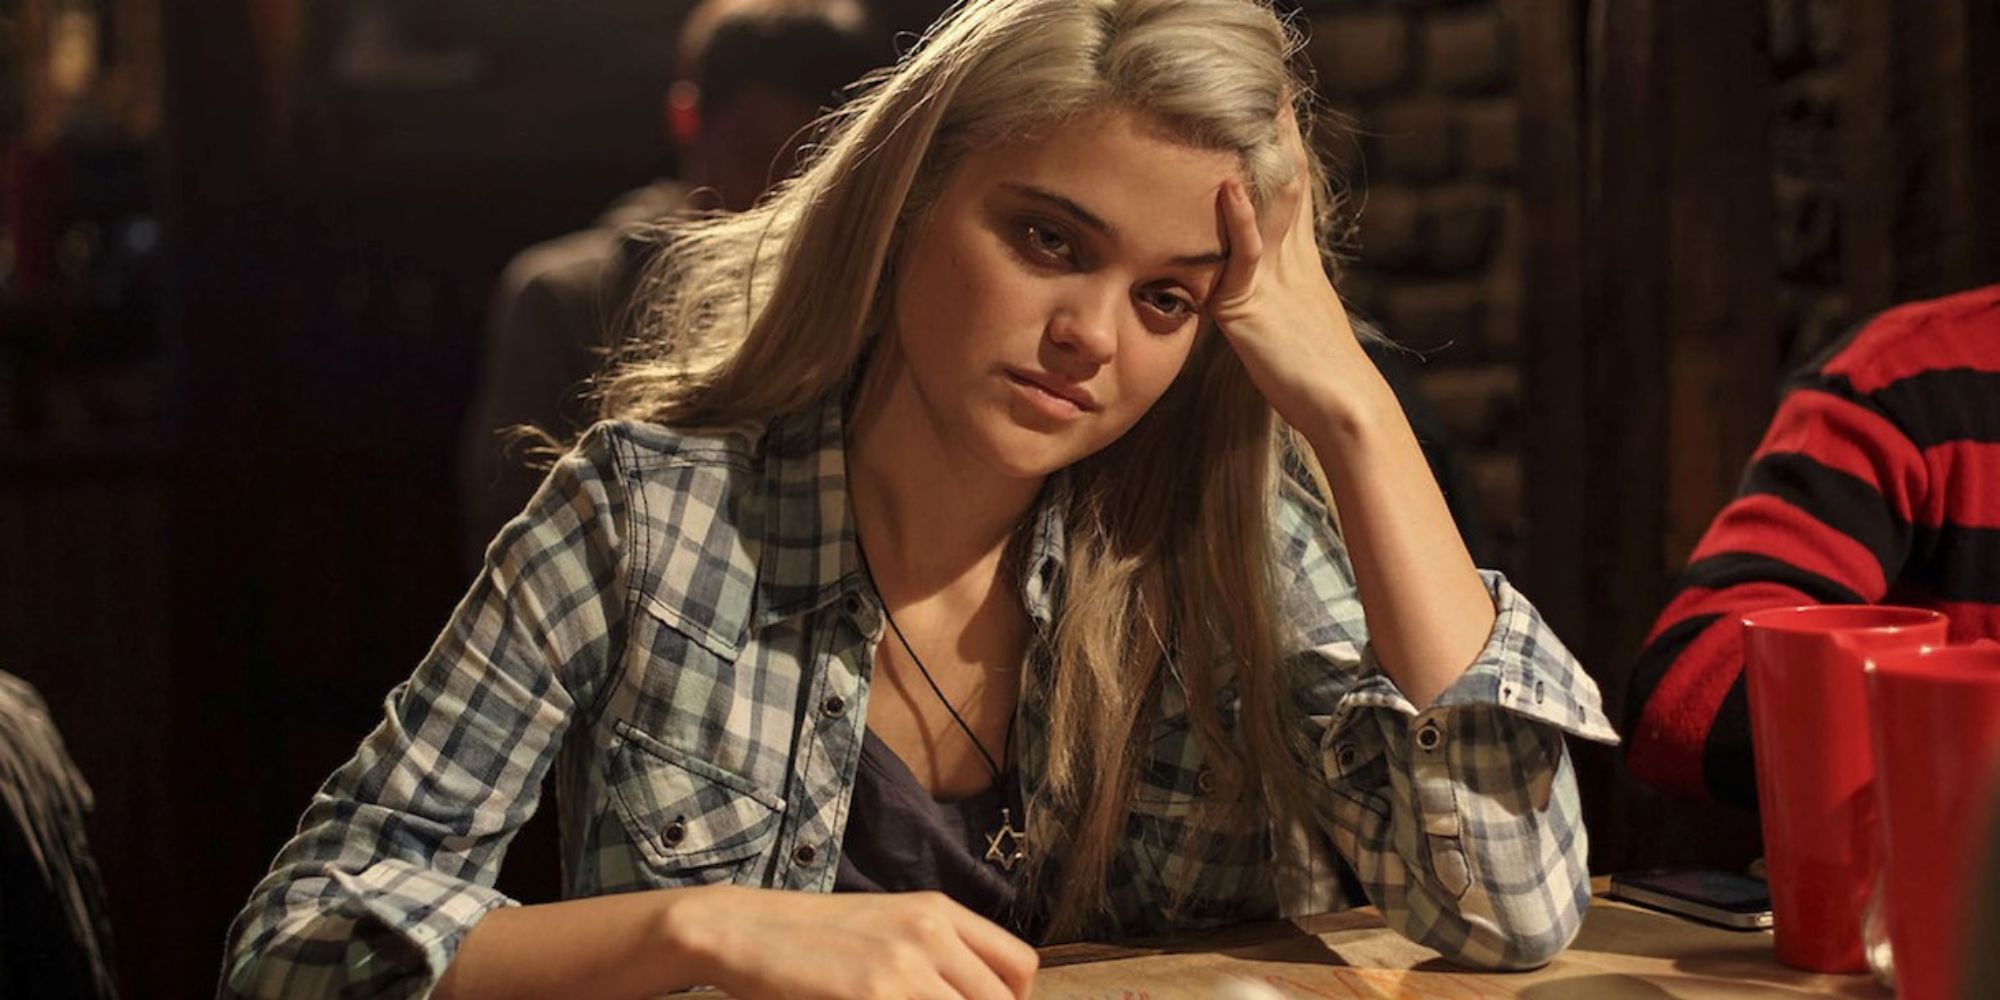 sky ferreira in the green inferno at a bar hand on forehead